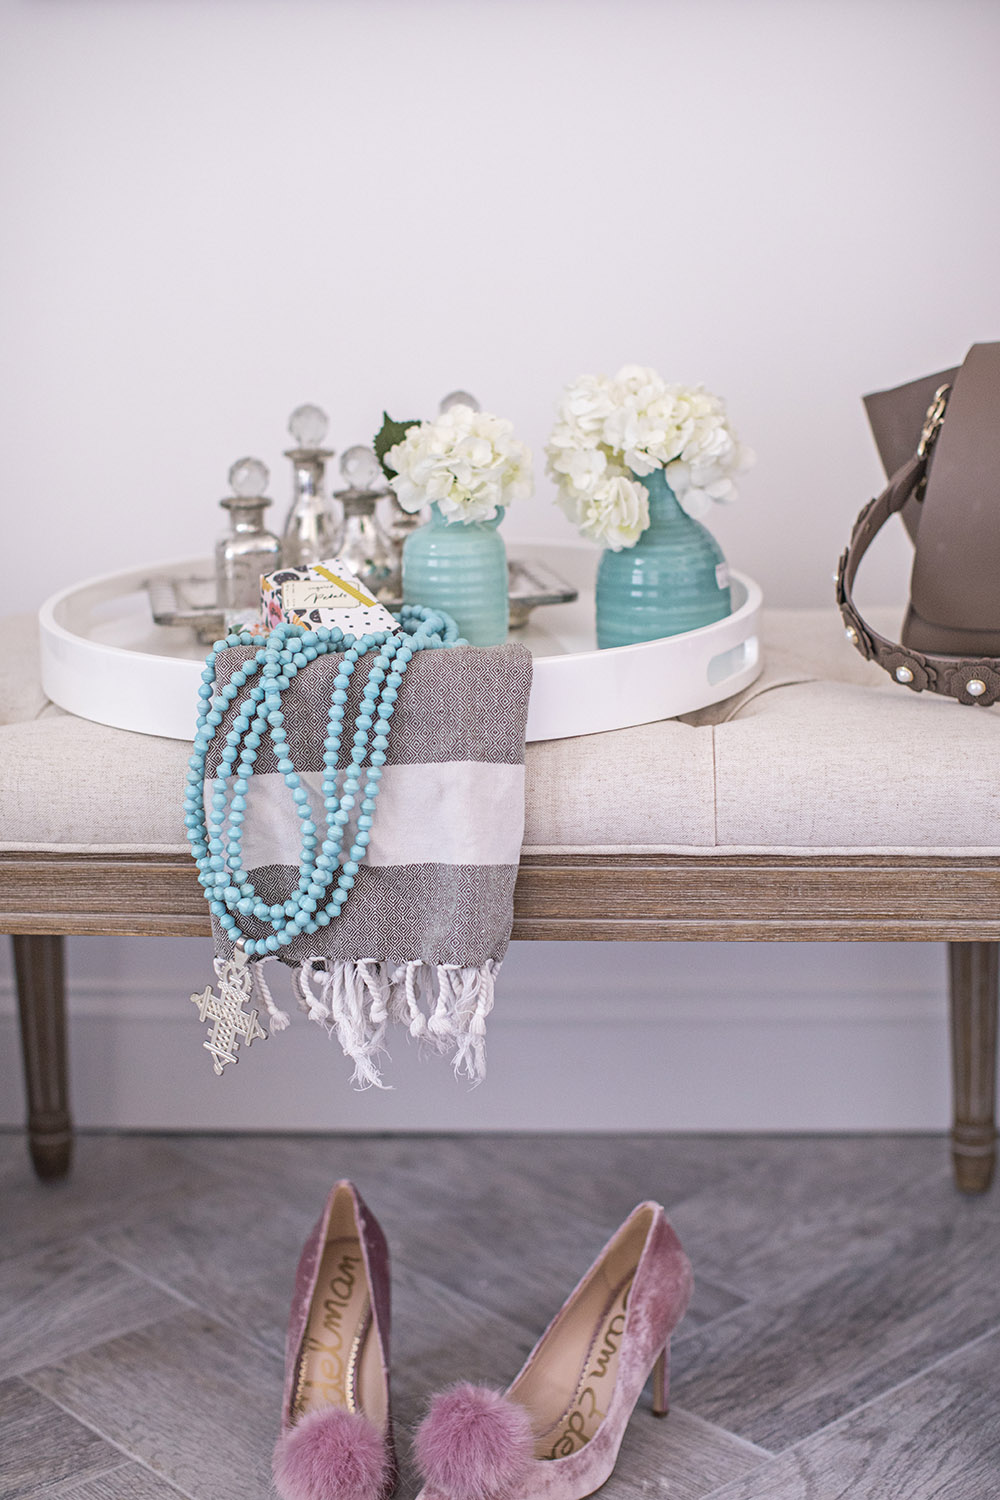 A white tray decorated with a throw and teal vases with flowers sitting on a bench.